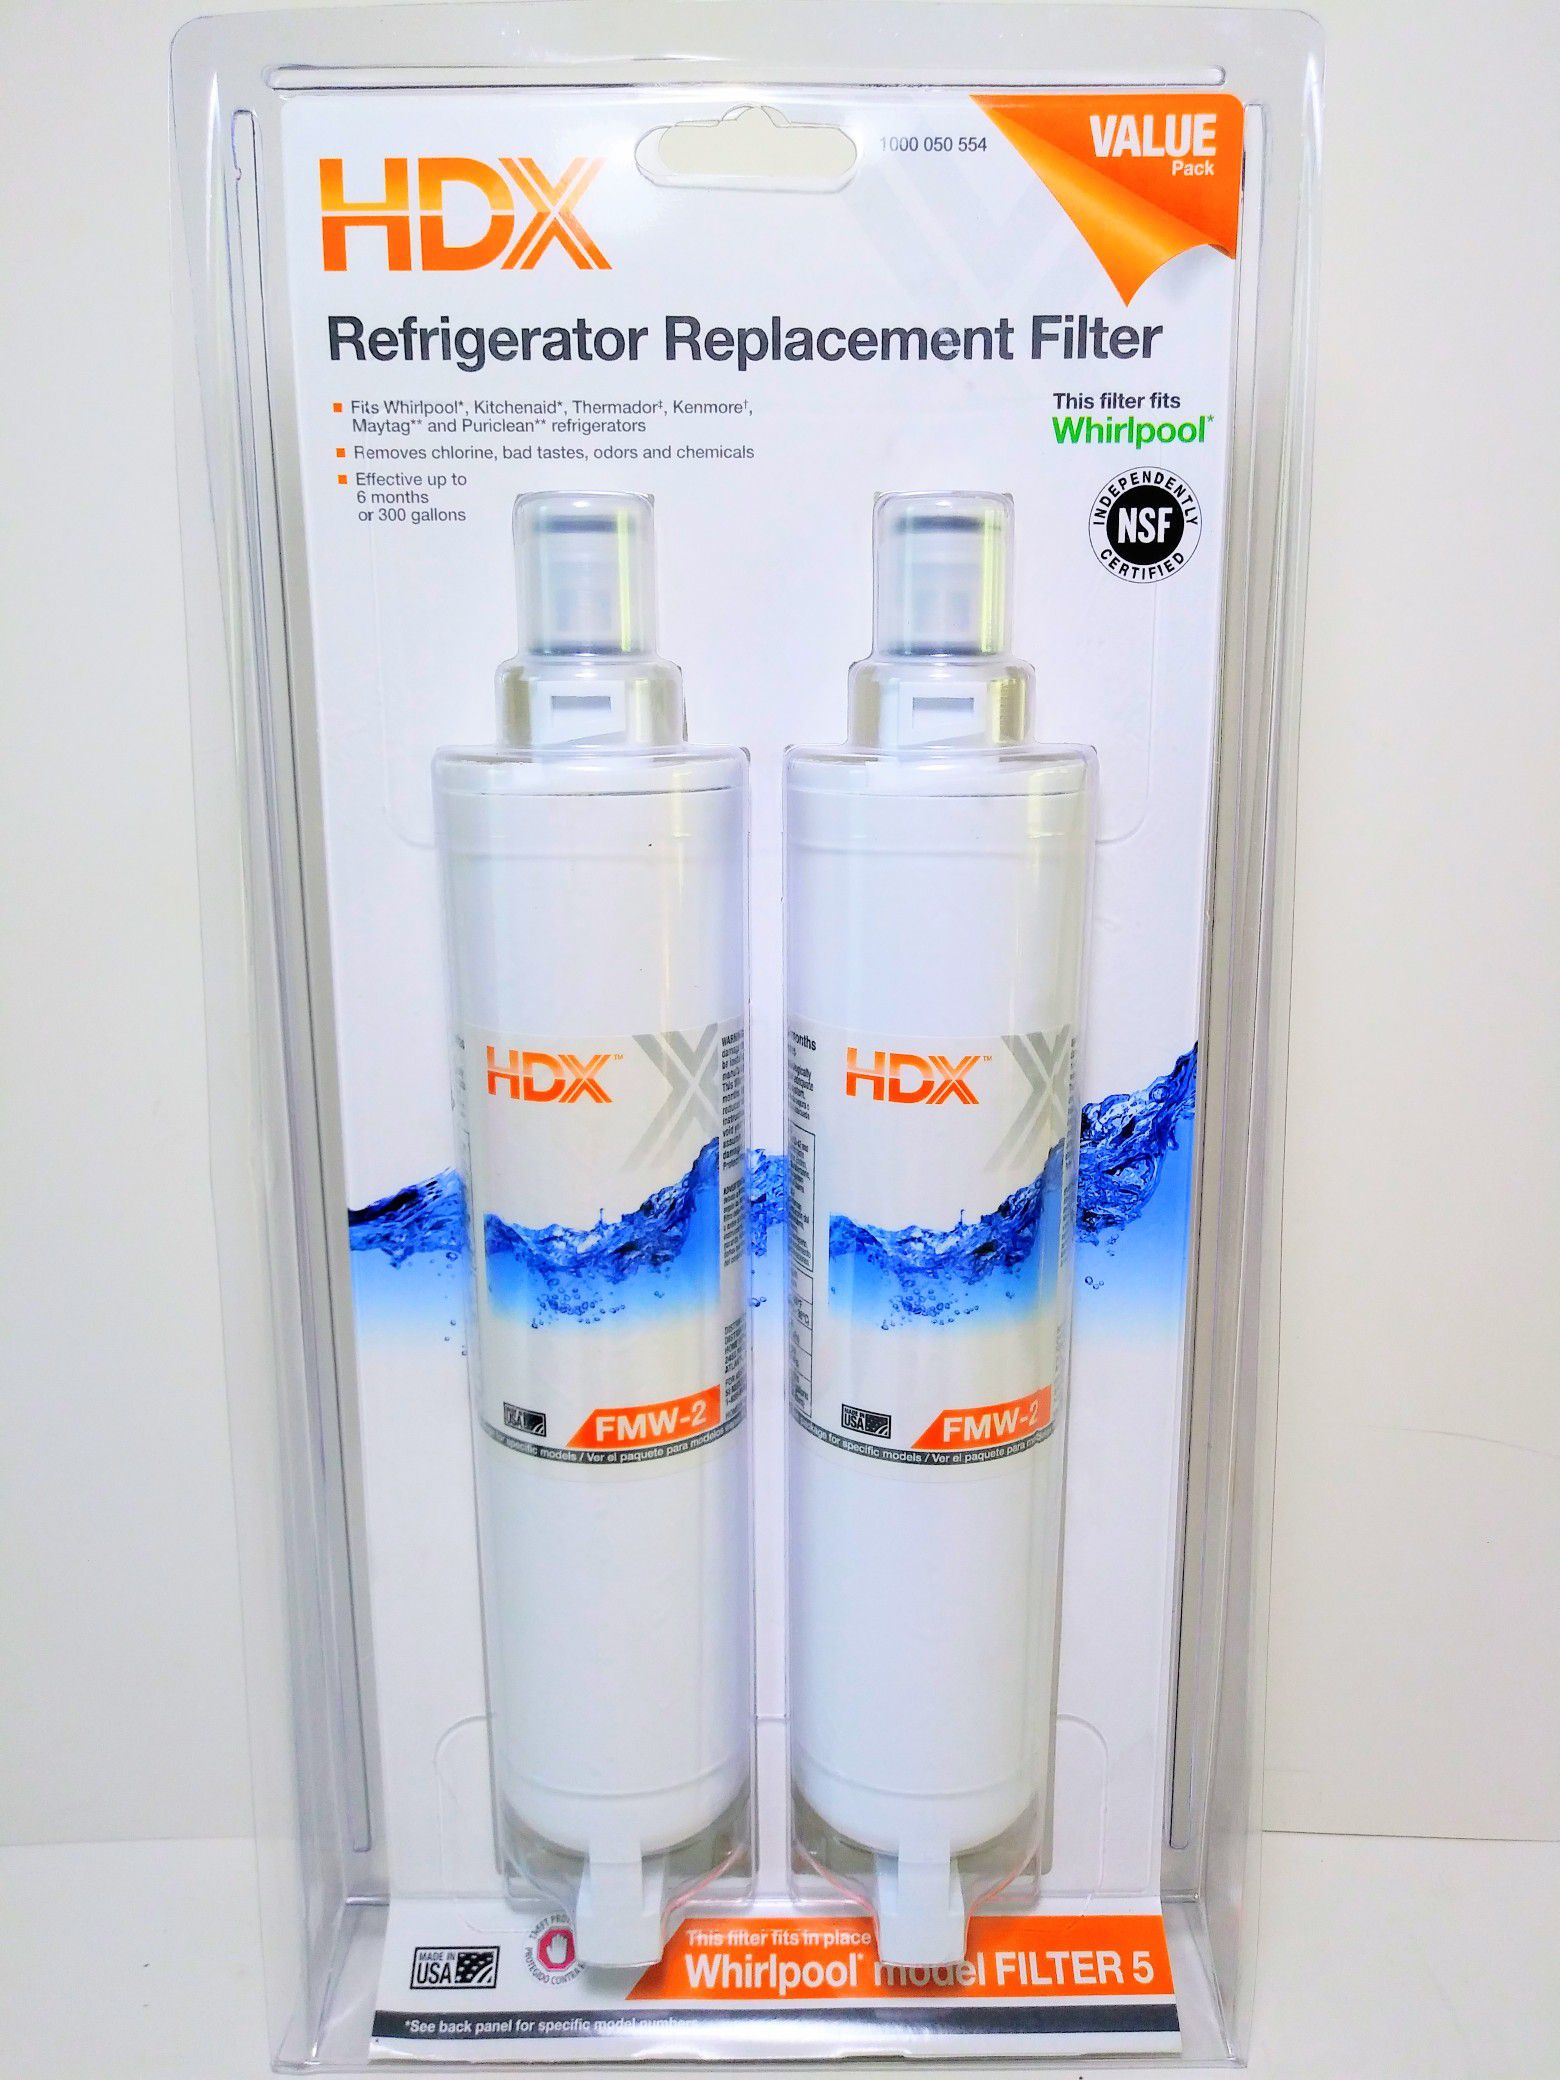 HDX Refrigerator Replacement Filters